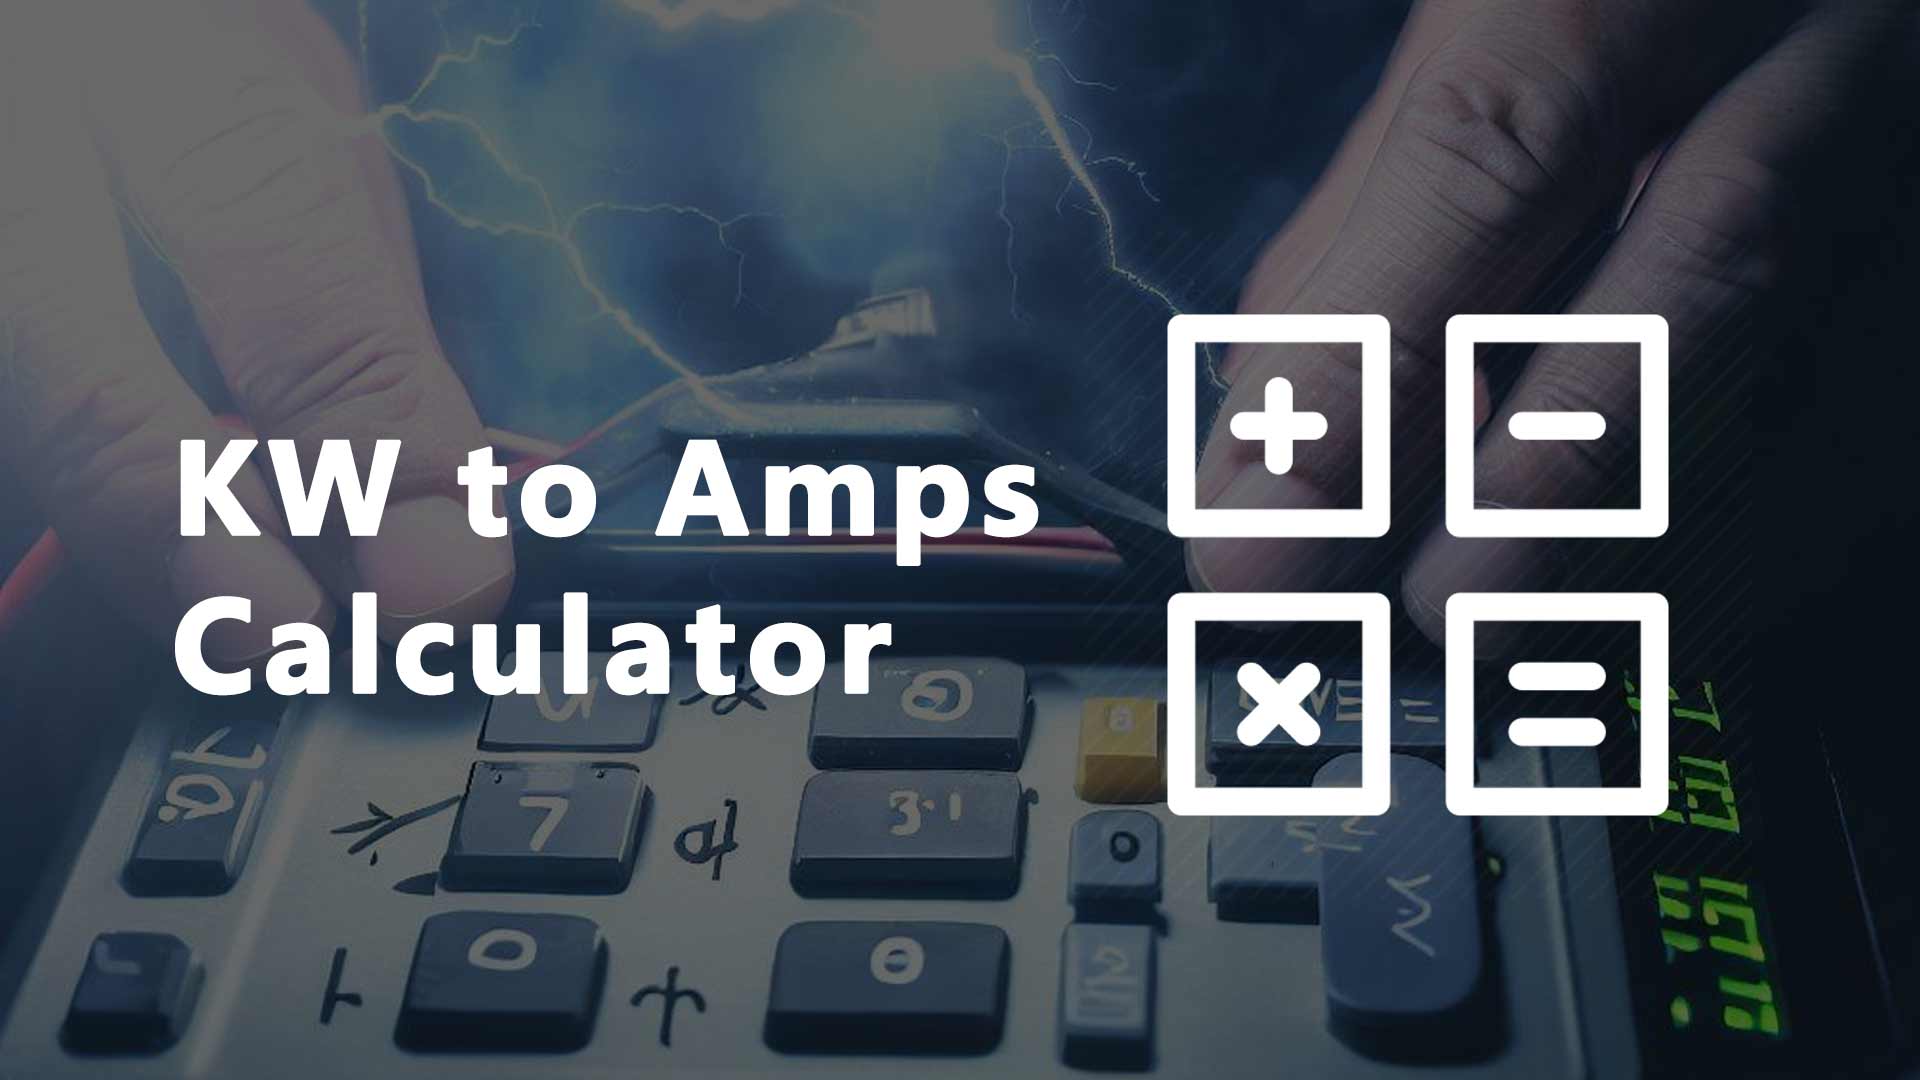 KW to Amps Calculator